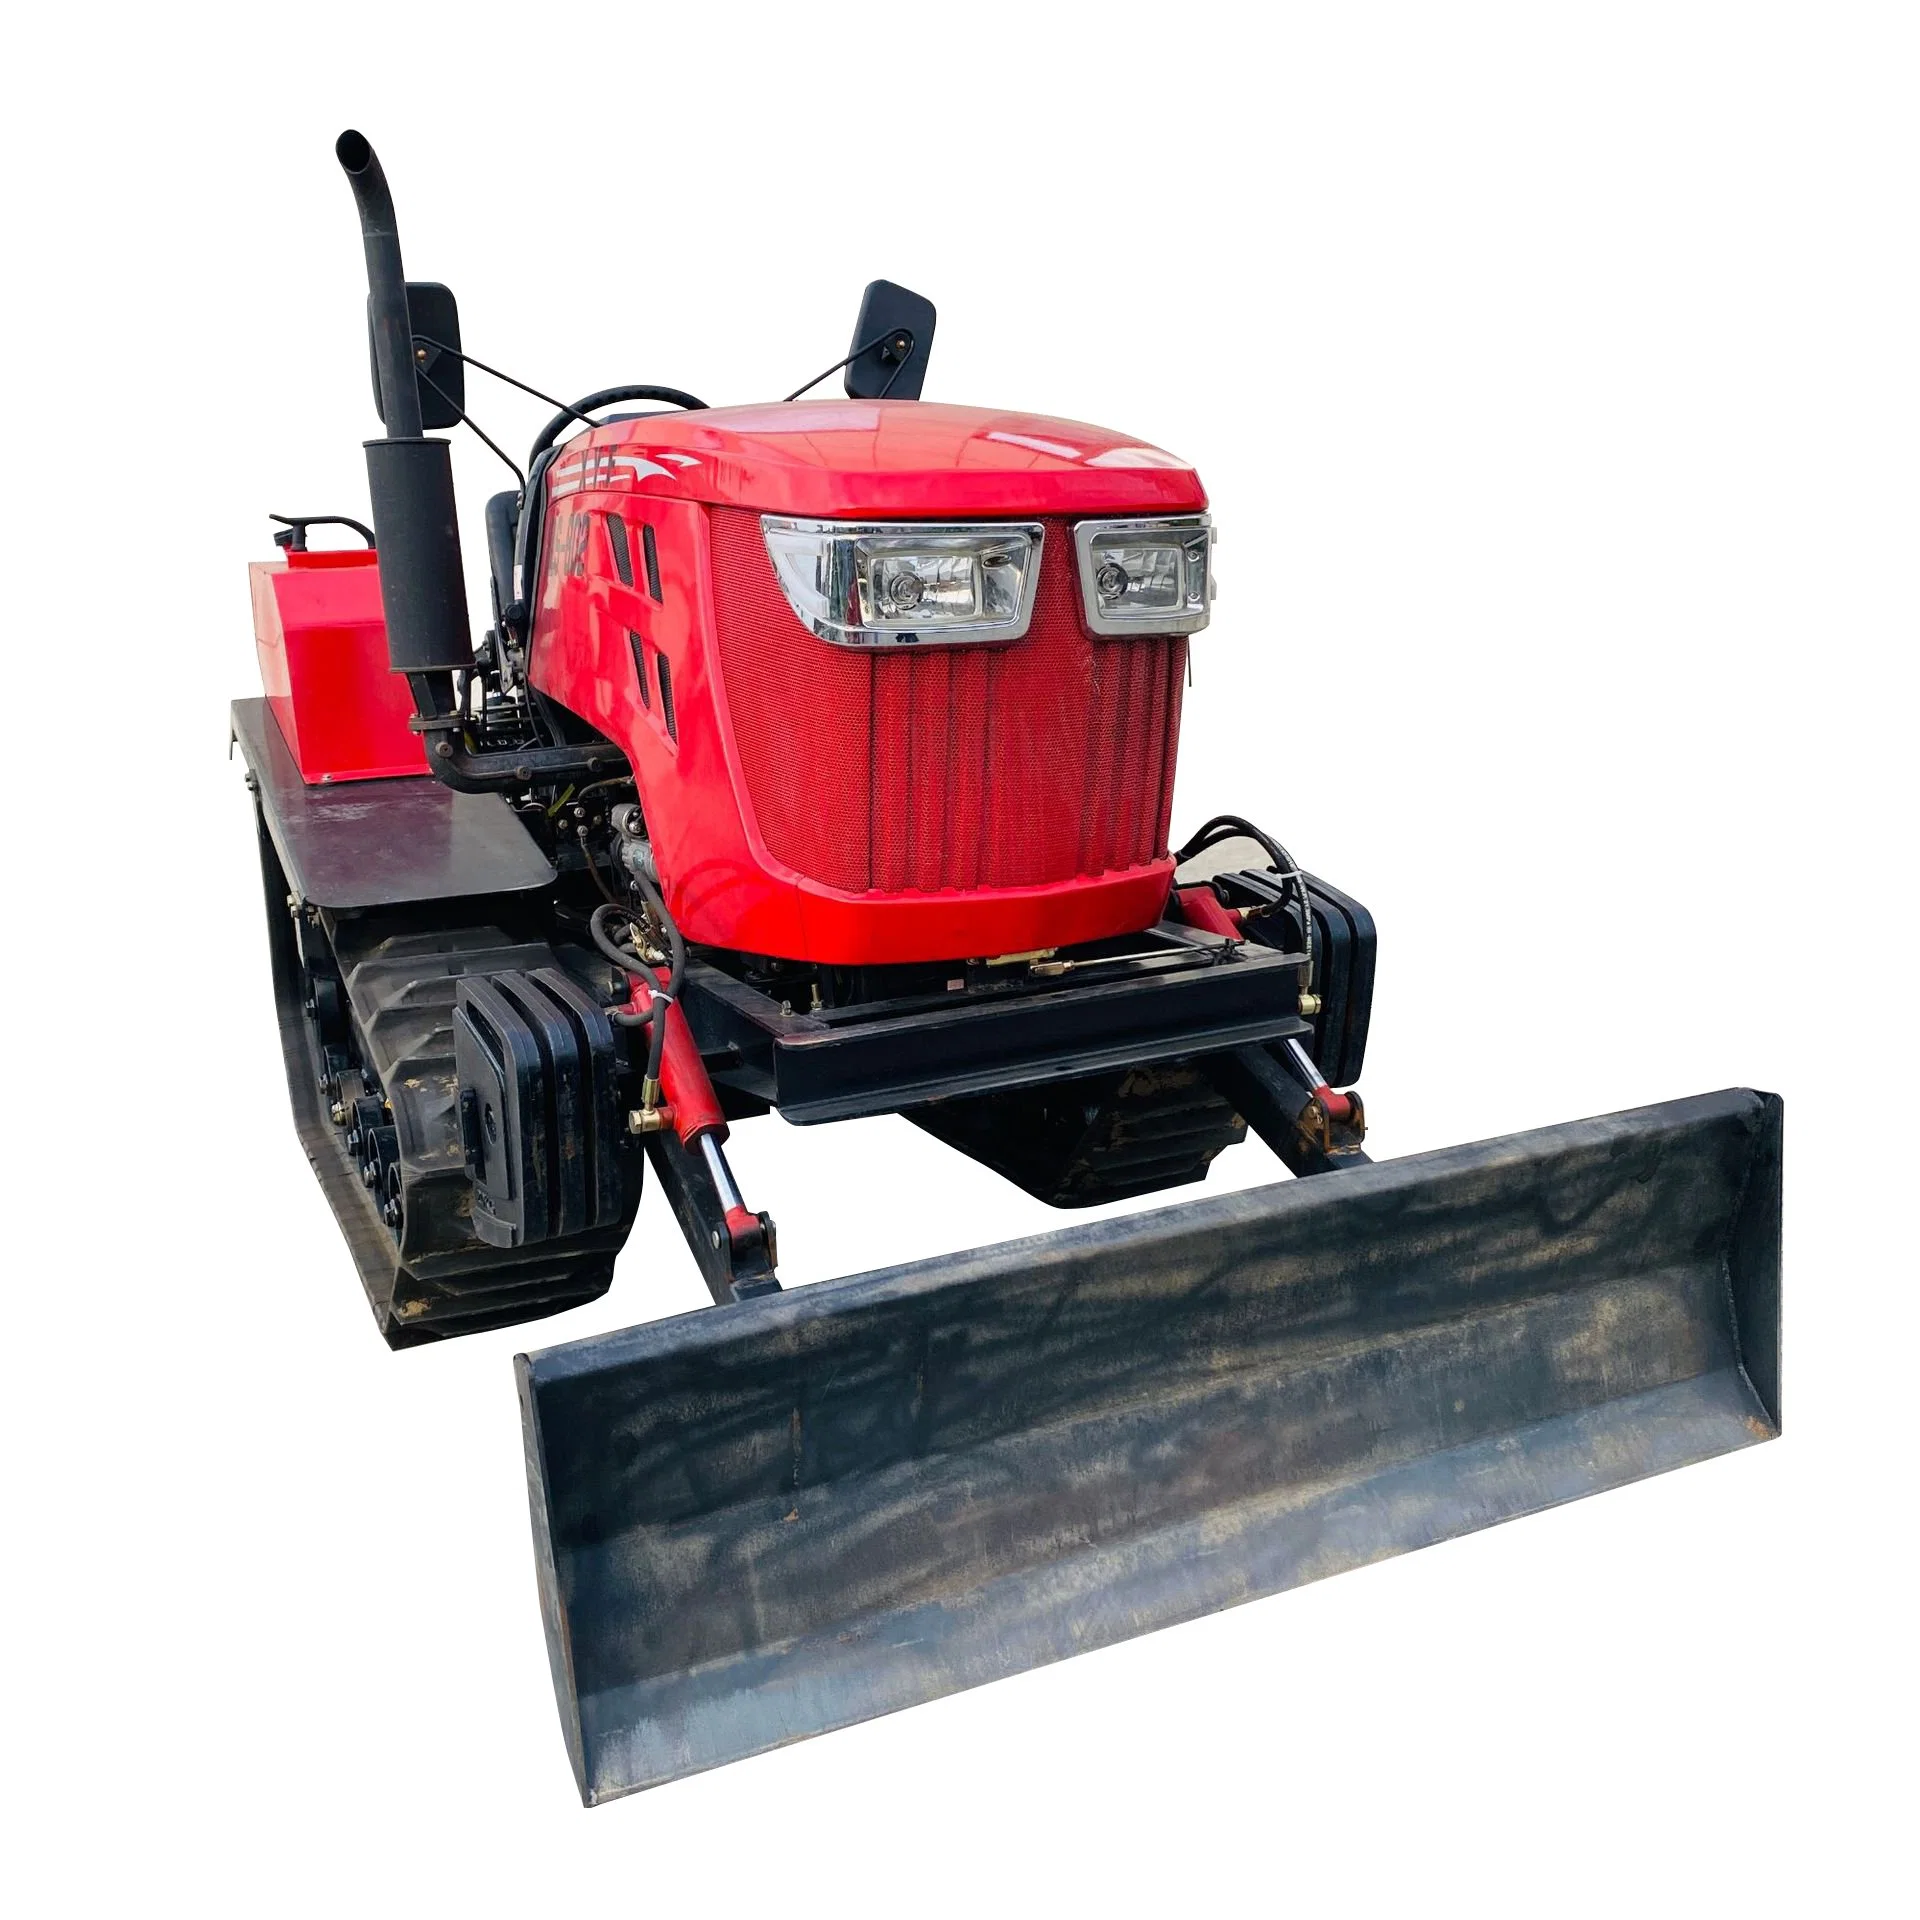 25HP Ride on Cultivator Rotary Tiller Garden Mini Tractor Agriculture Equipment with Hitching Tool